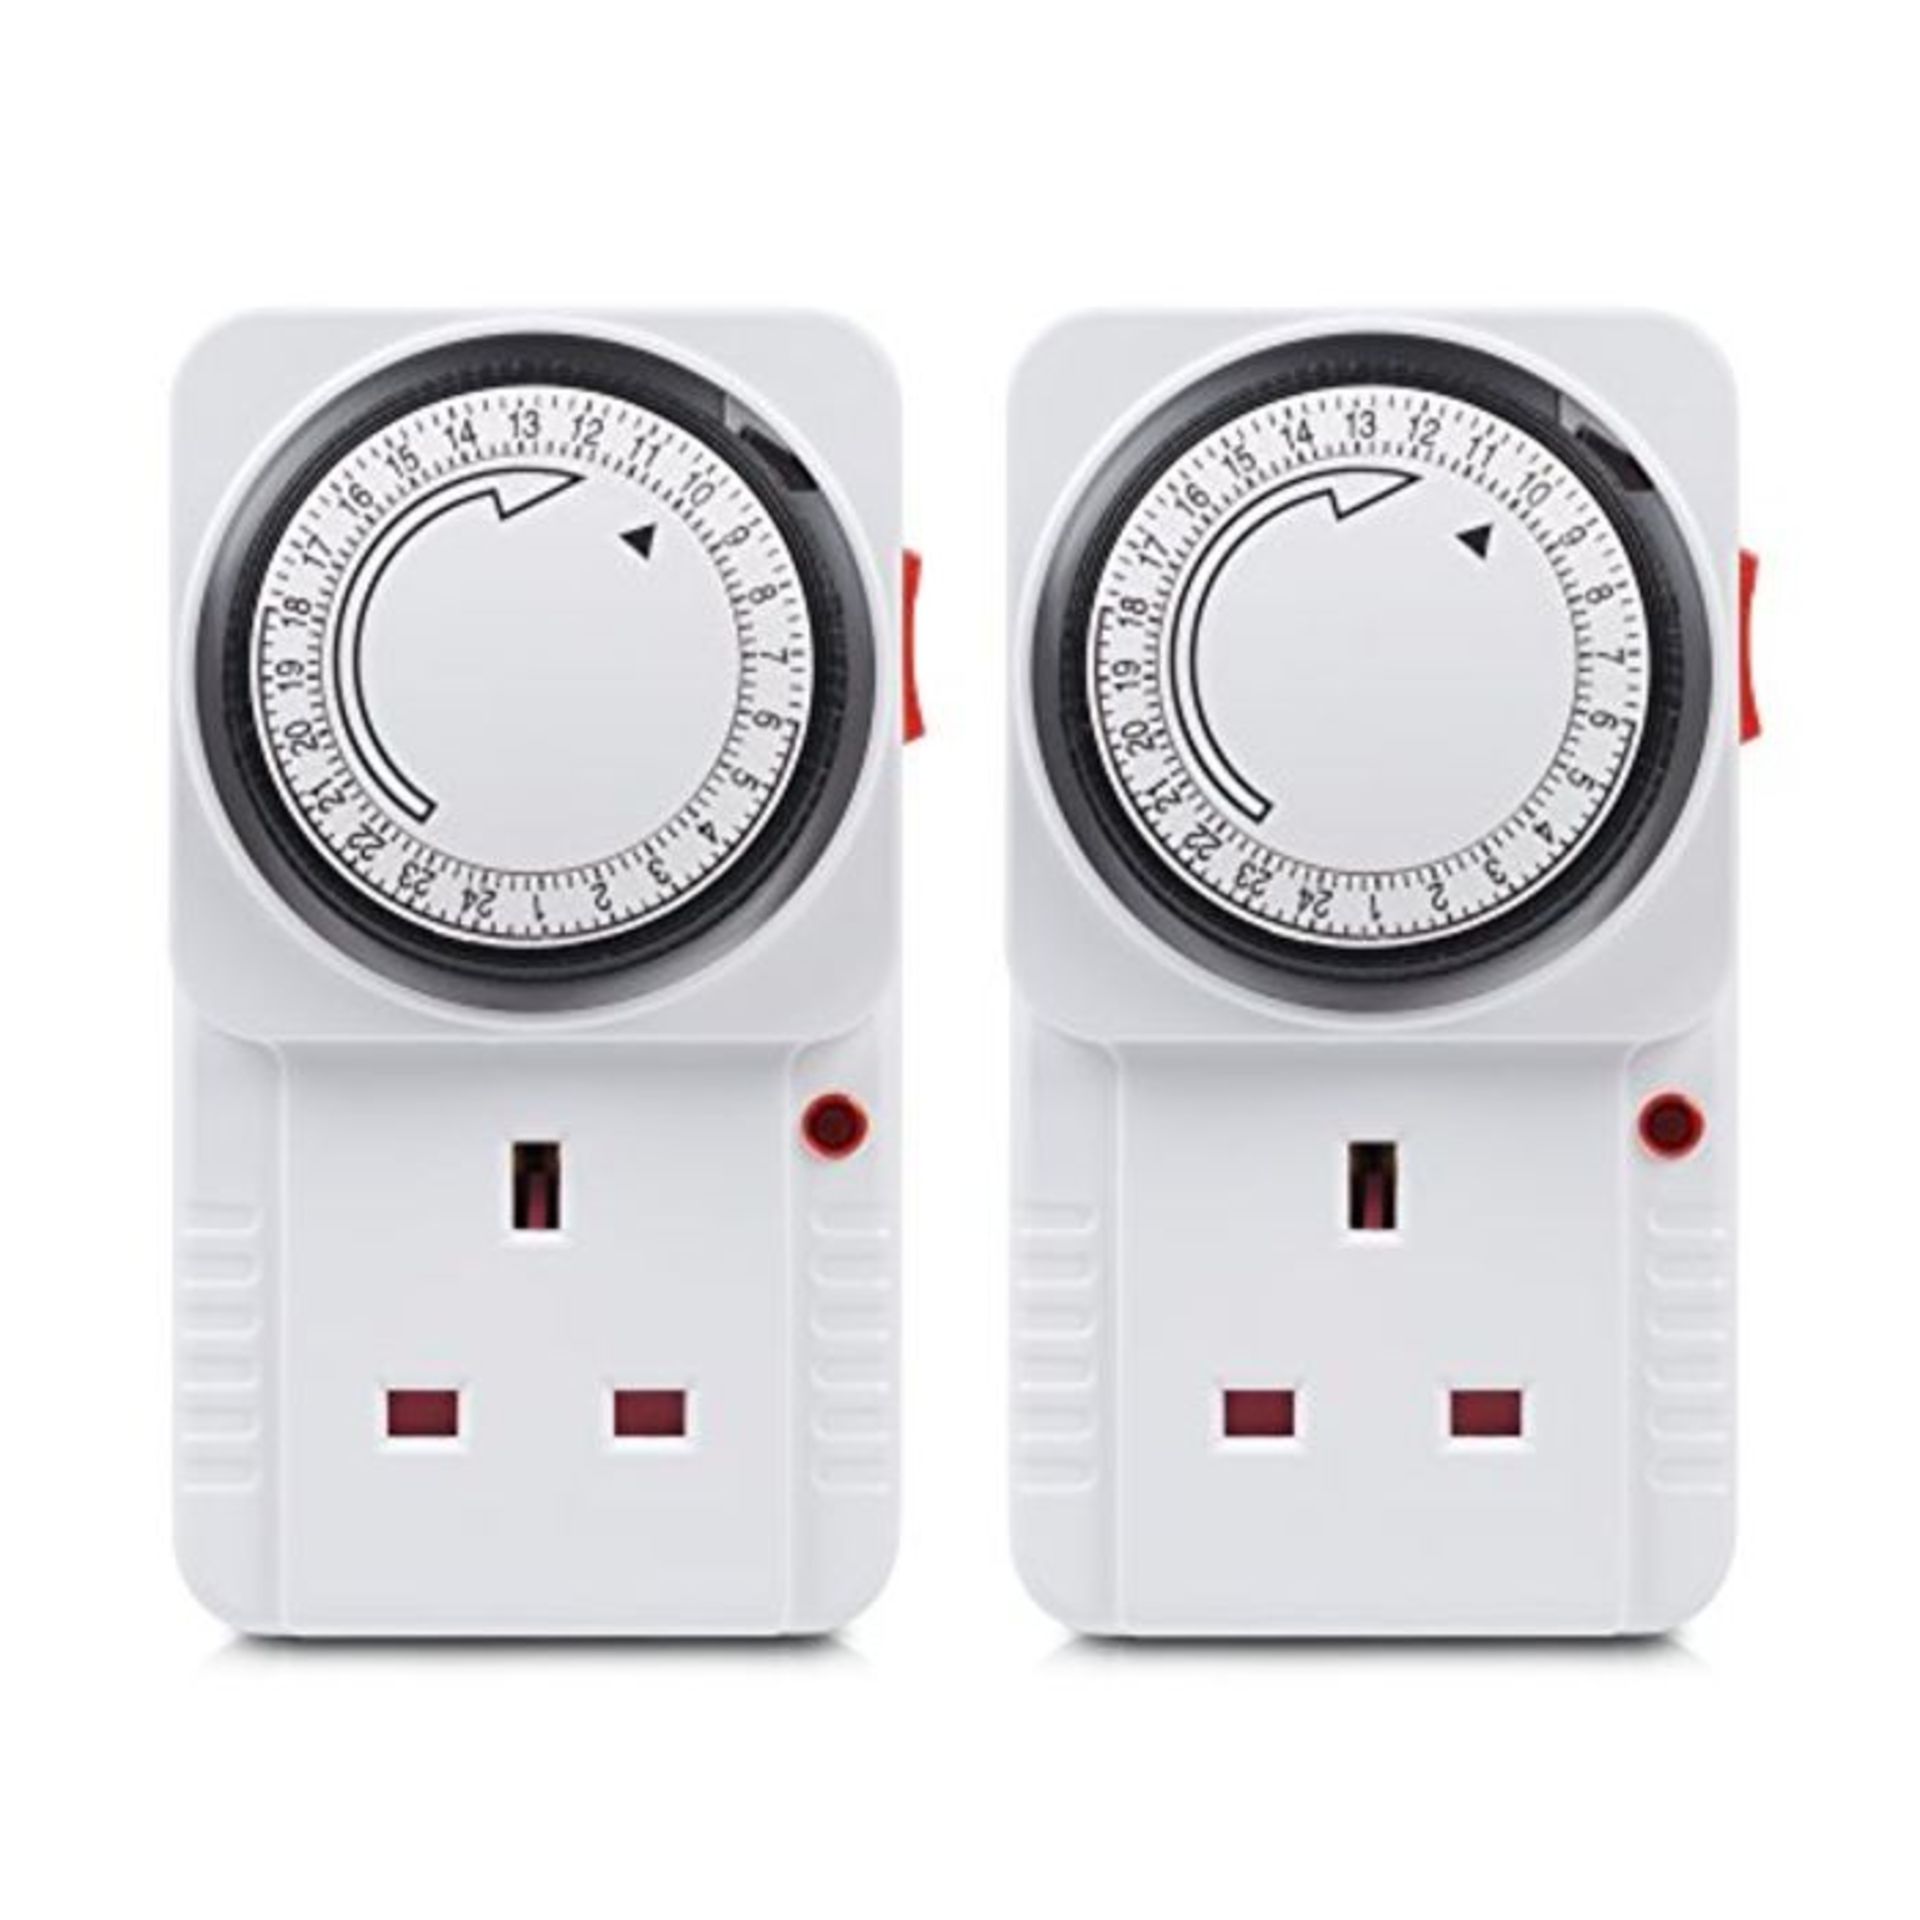 HBN BND-50/E39 Plug-in Energy Saving Programmable Mechanical Timer Switch 2 Pack